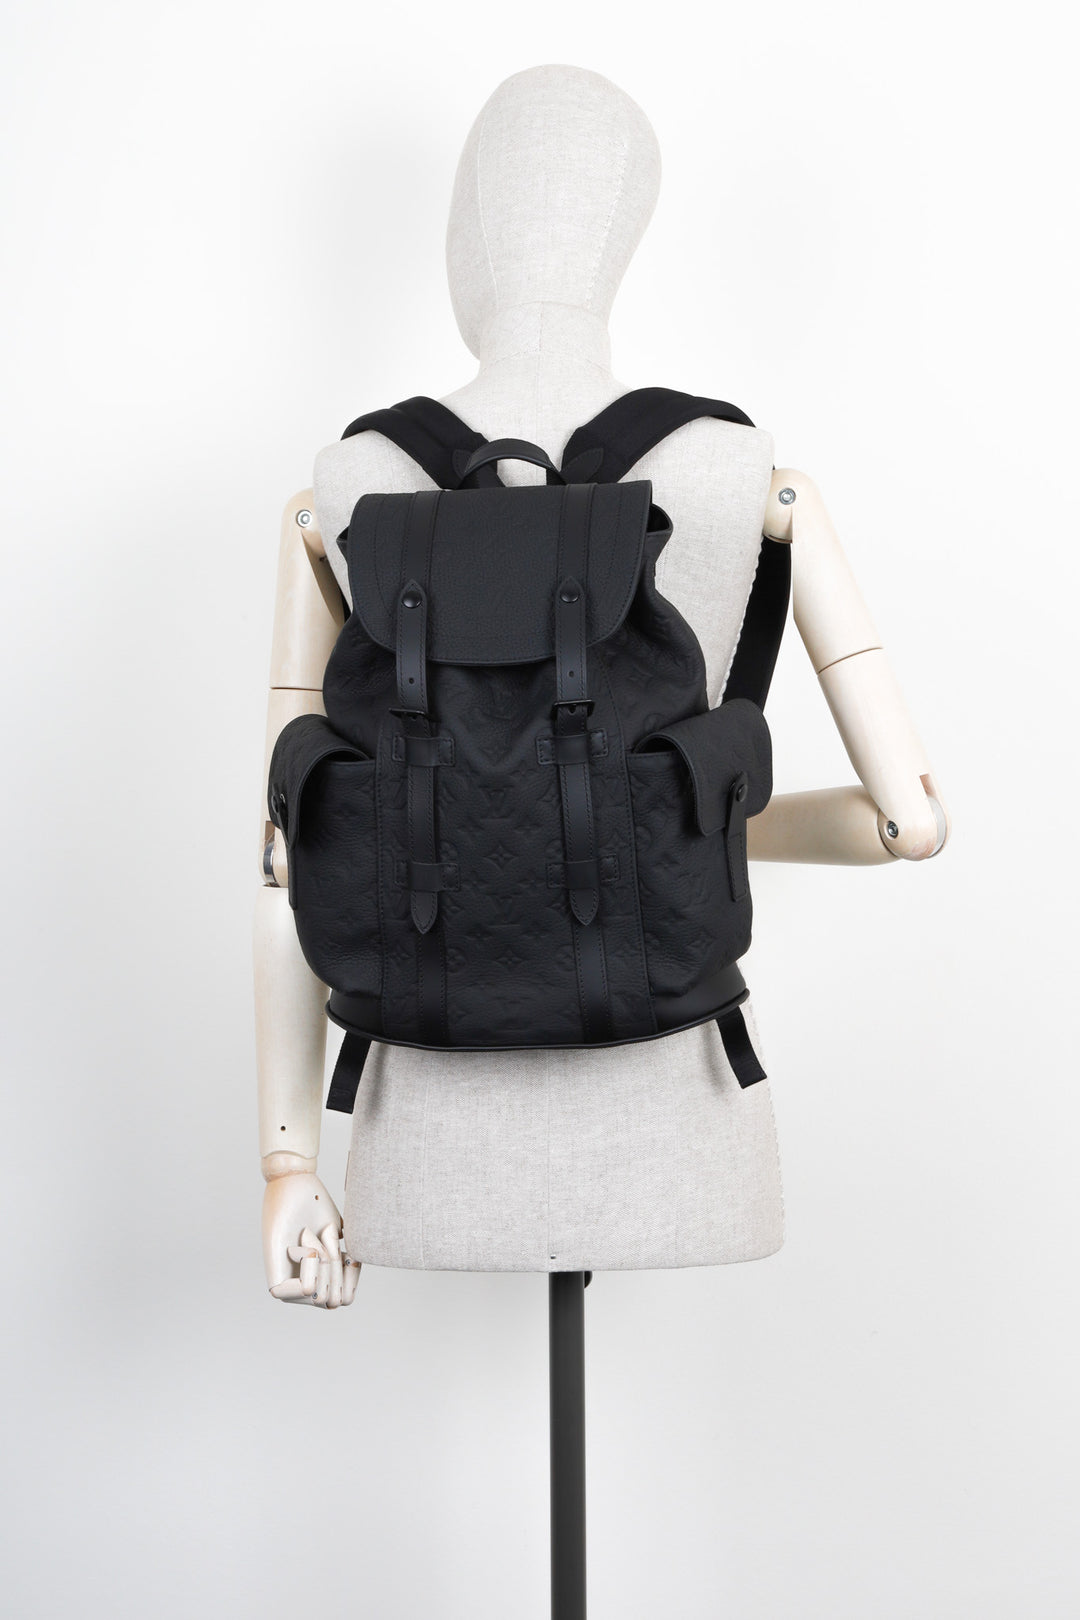 LOUIS VUITTON Christopher MM Backpack Black